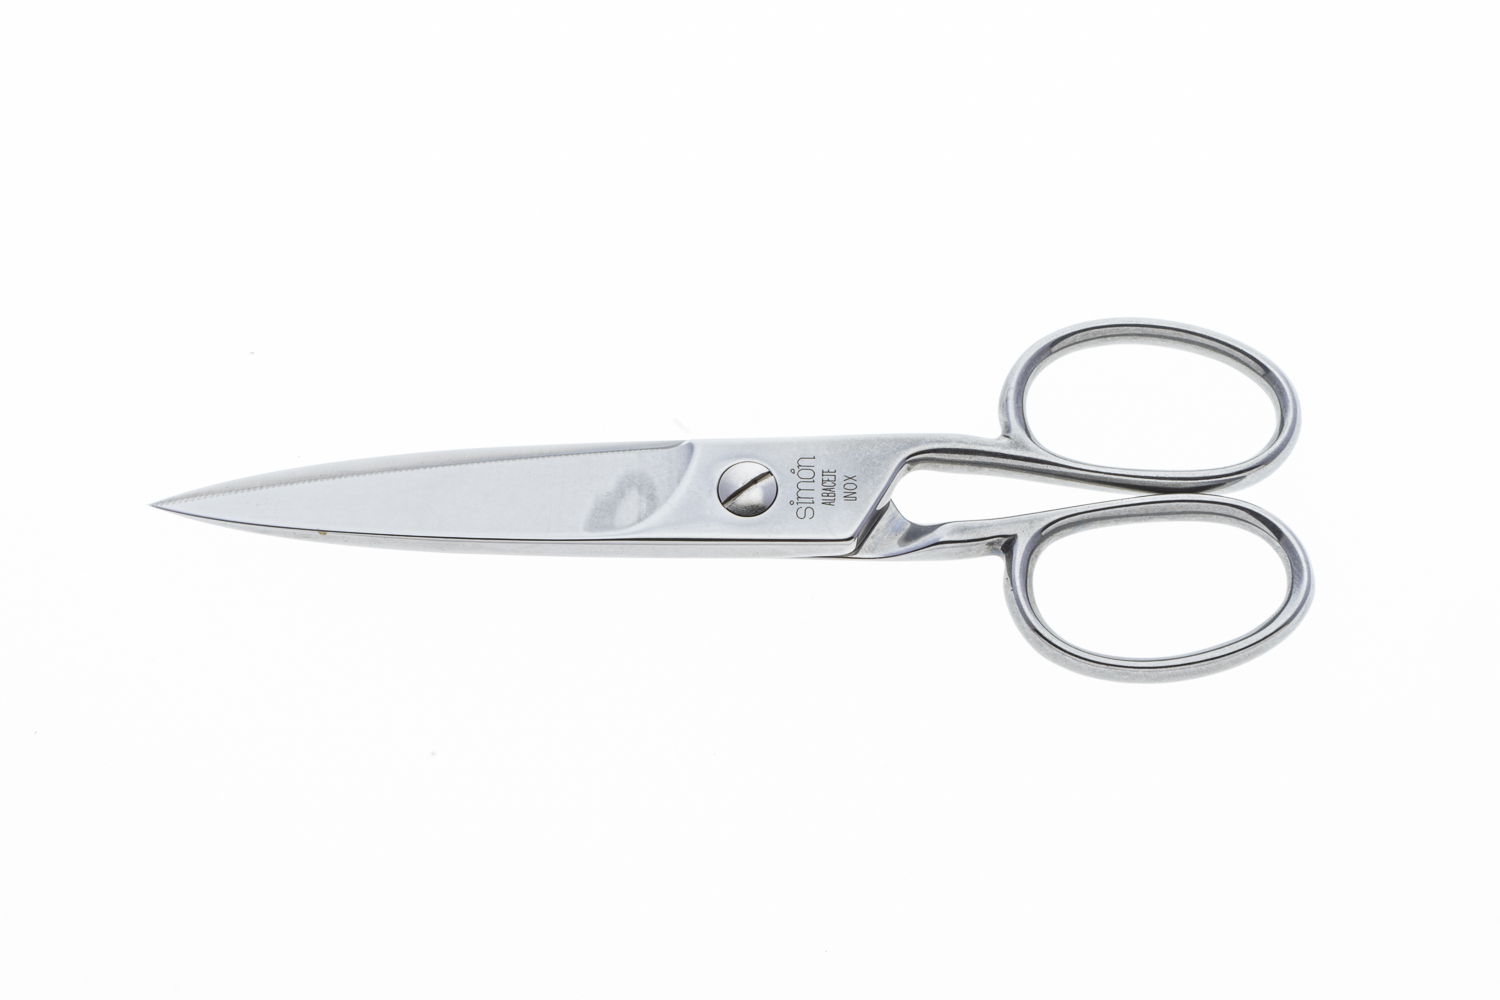 Simón classic model kitchen scissors small made of stainless steel